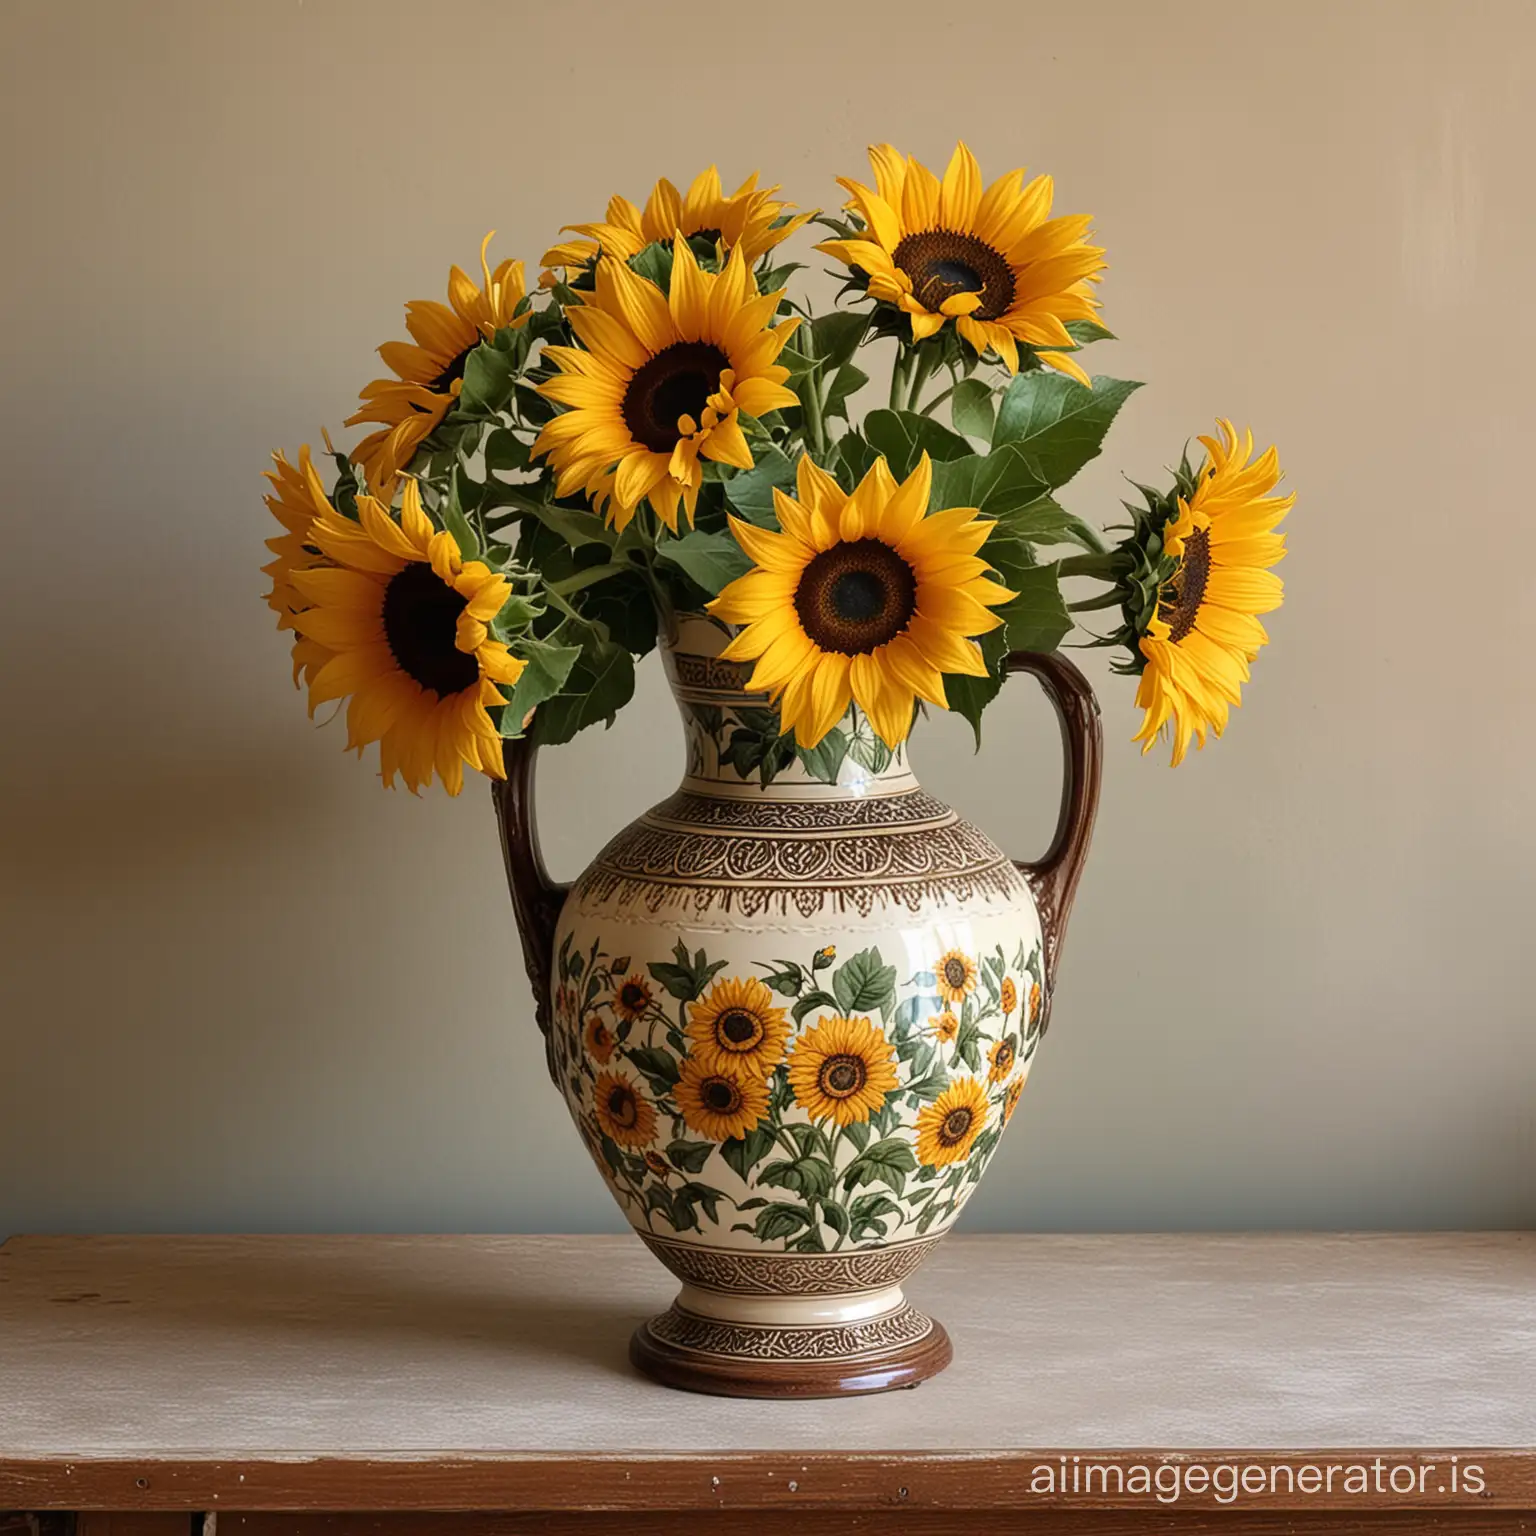 Elegant Antique Vase with Sunflowers

Artistically arranged sunflowers in a timeless antique vase. This piece blends the natural beauty of sunflowers with the refined grace of a vintage vase.